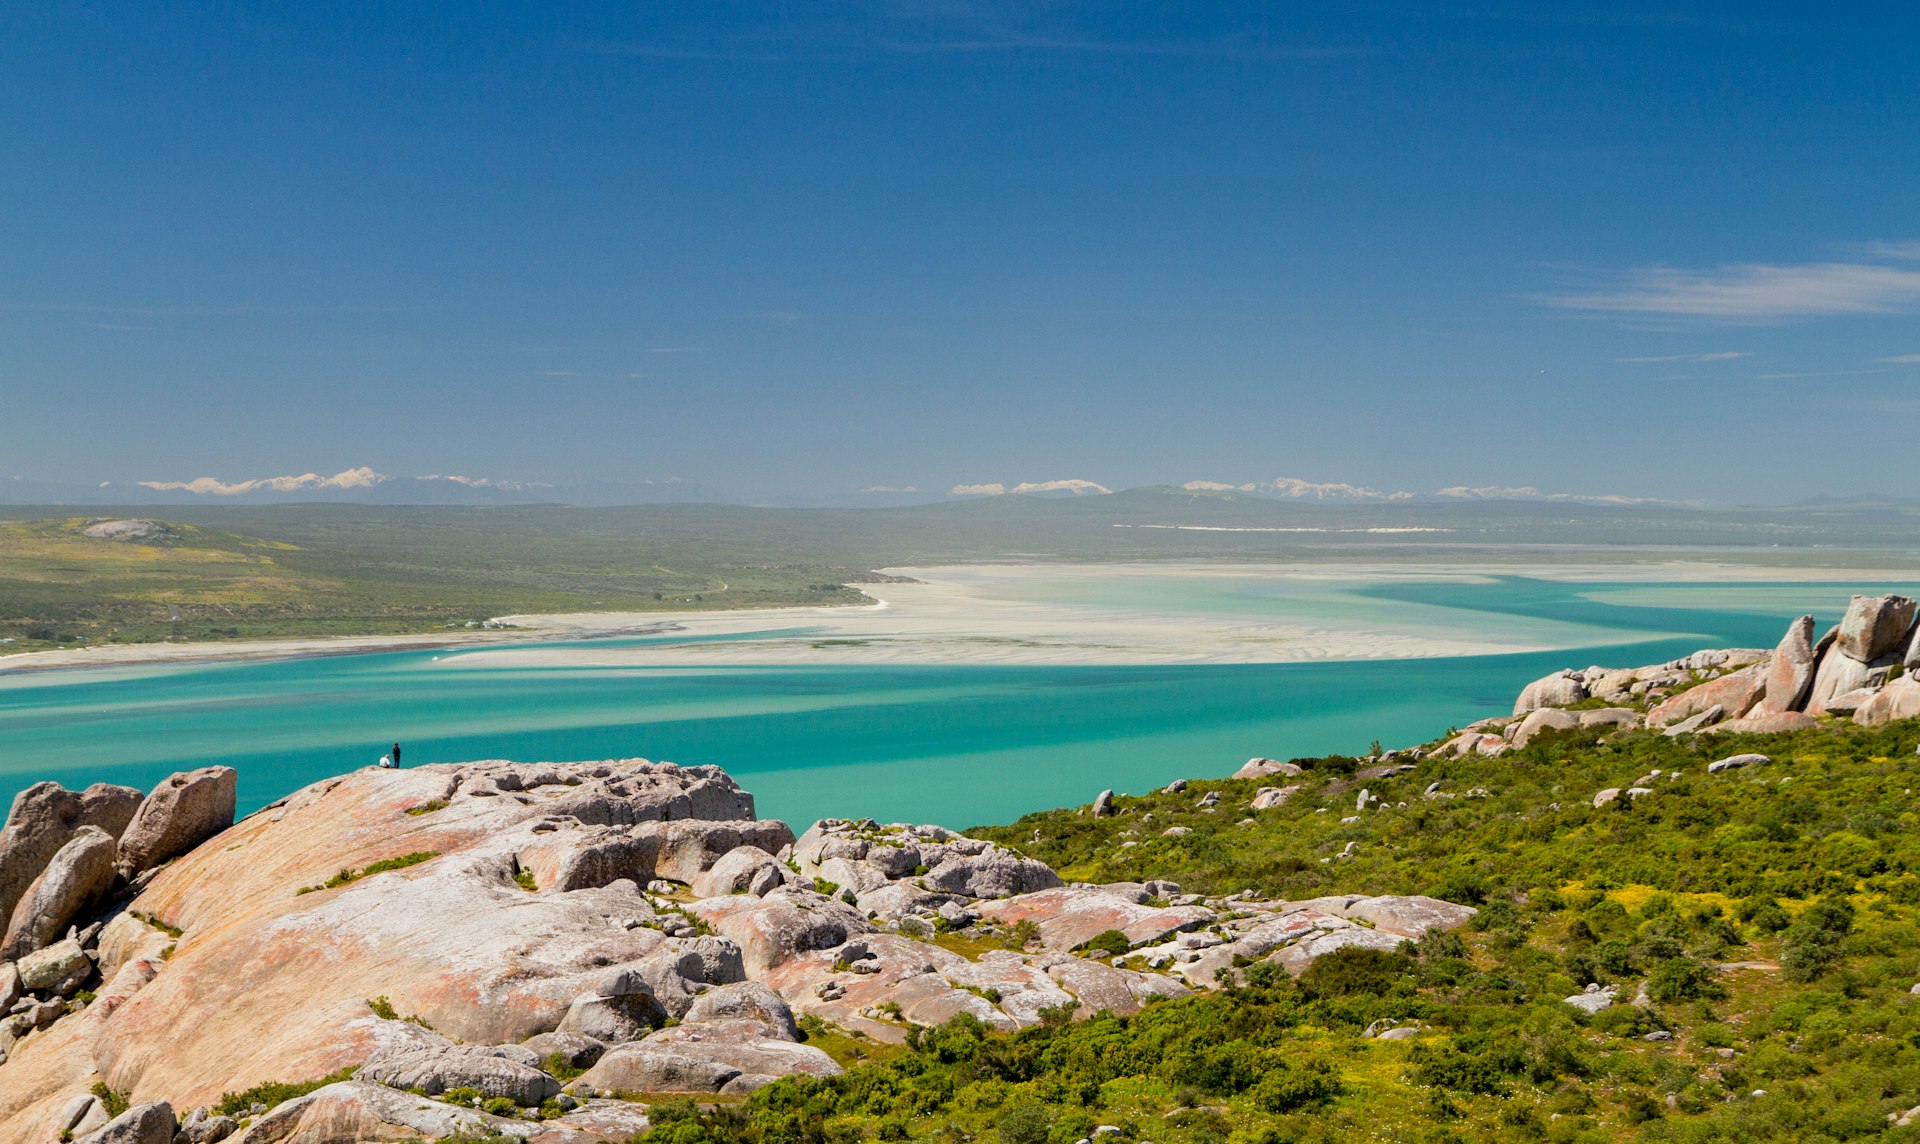 Turquoise waters near Langebaan Beach, with white sweeps of sand at the shallow parts